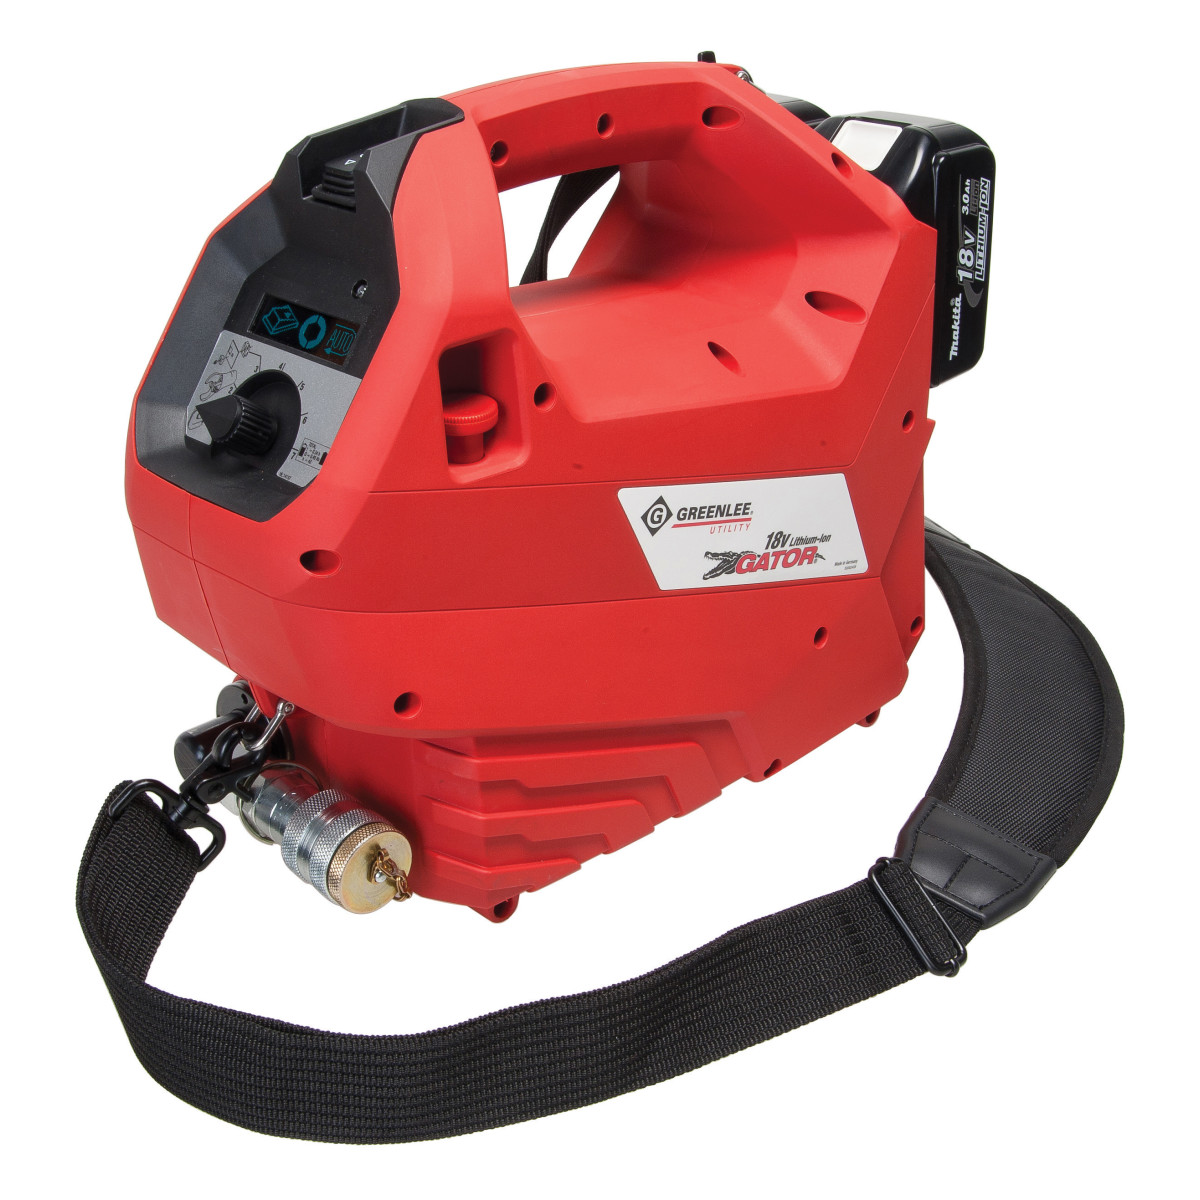 Battery Powered Hydraulic Pump with 120V Adapter.  Operates with any 10K PSI single acting remote heads.  3 in 1 pressure specific program settings for crimping cutting and punching.  Dashboard display provides real time monitoring of operation.  On-board and remote rocker switches for pump activation.